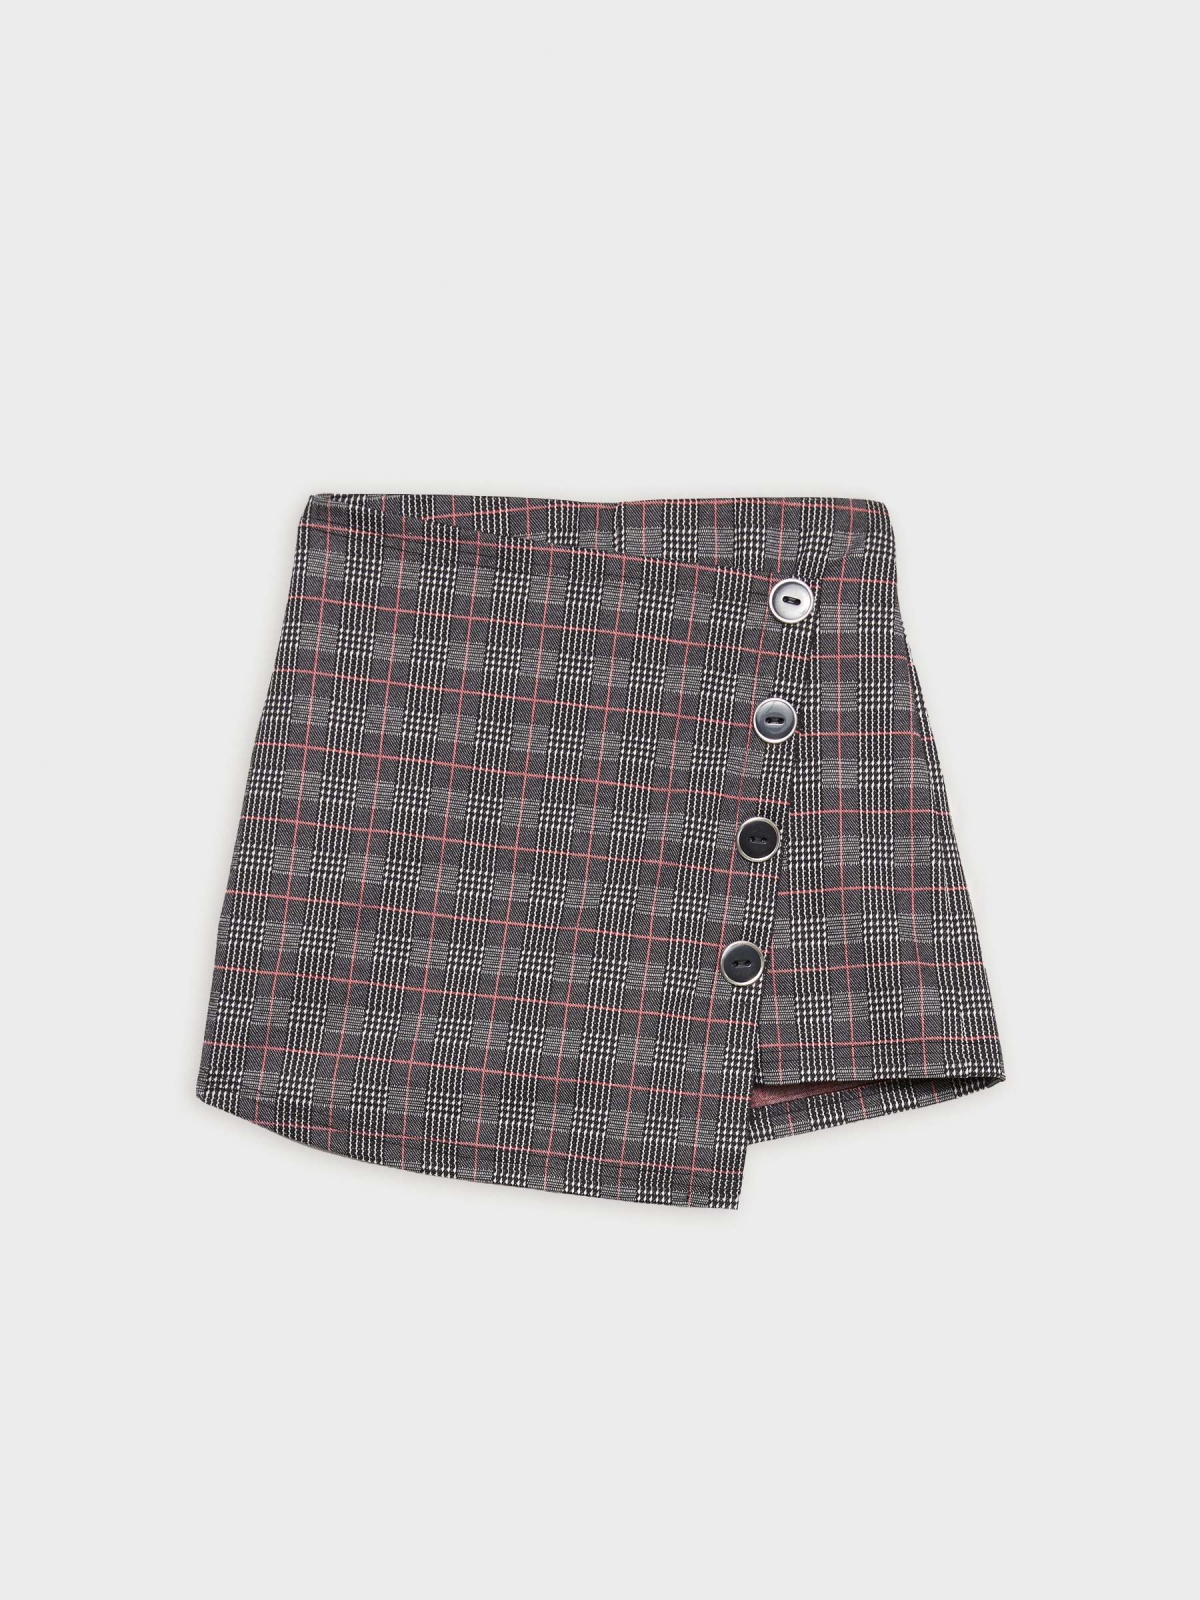  Plaid skort with buttons black